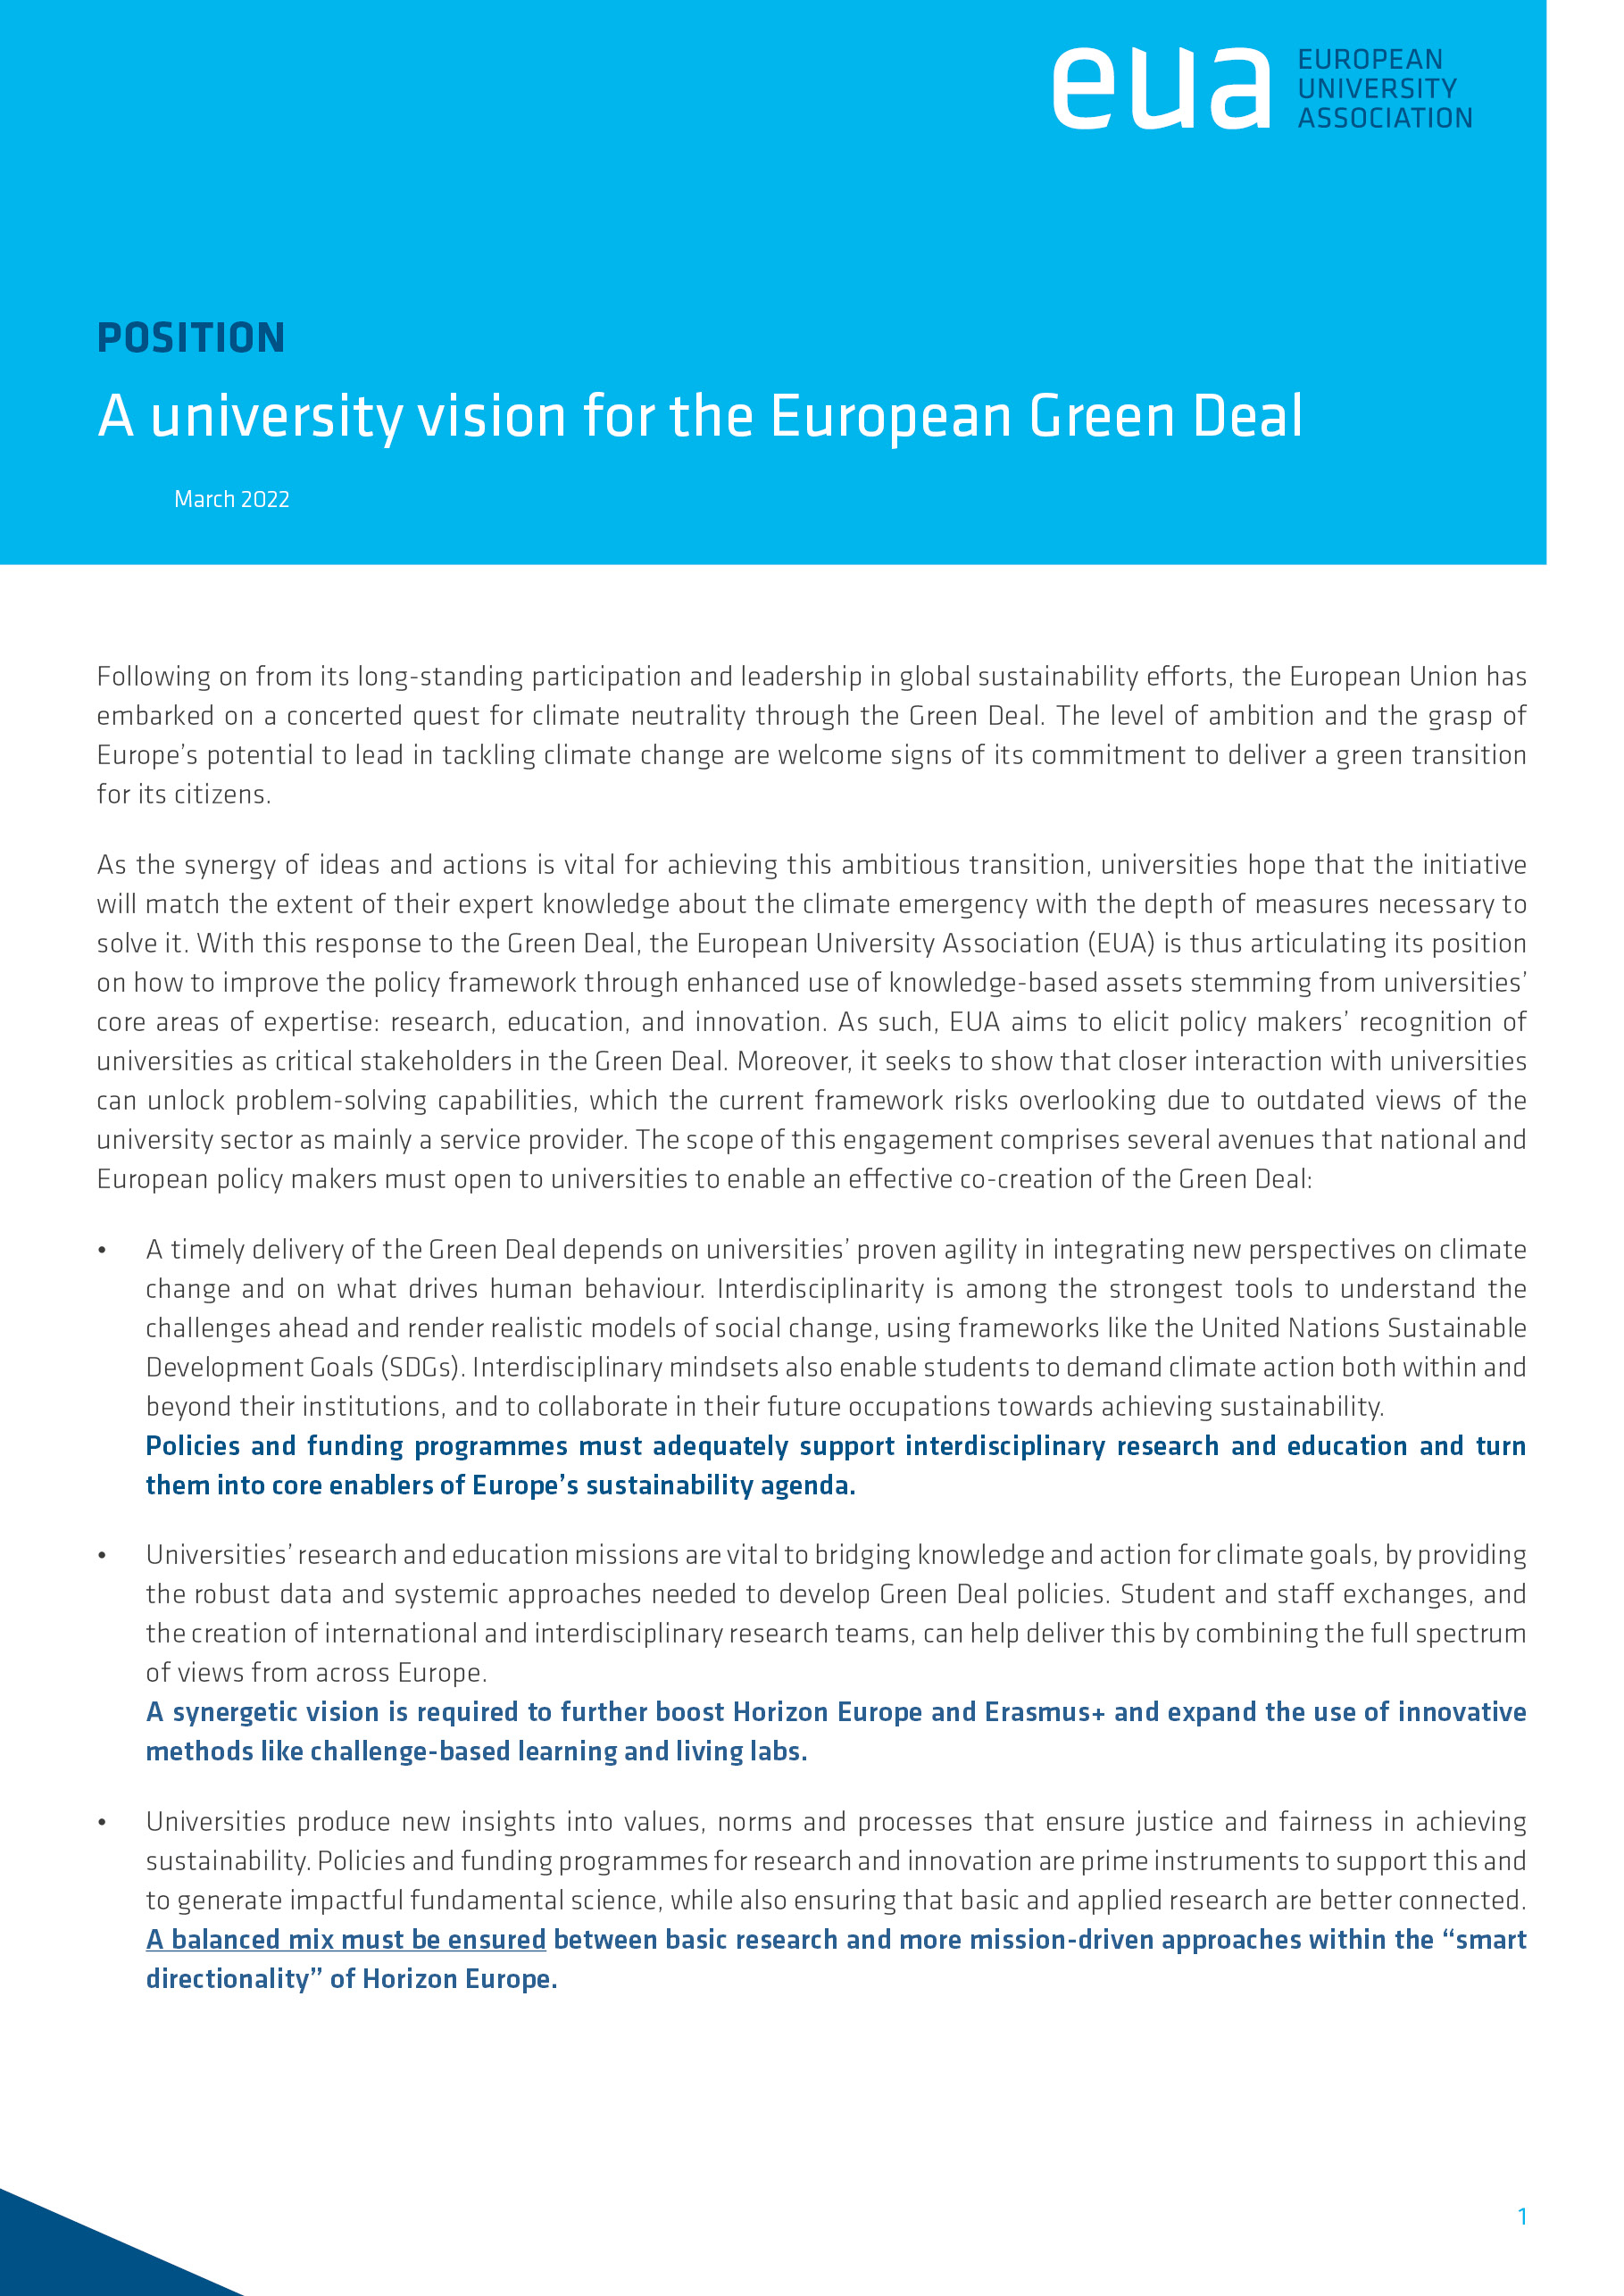 A university vision for the European Green Deal